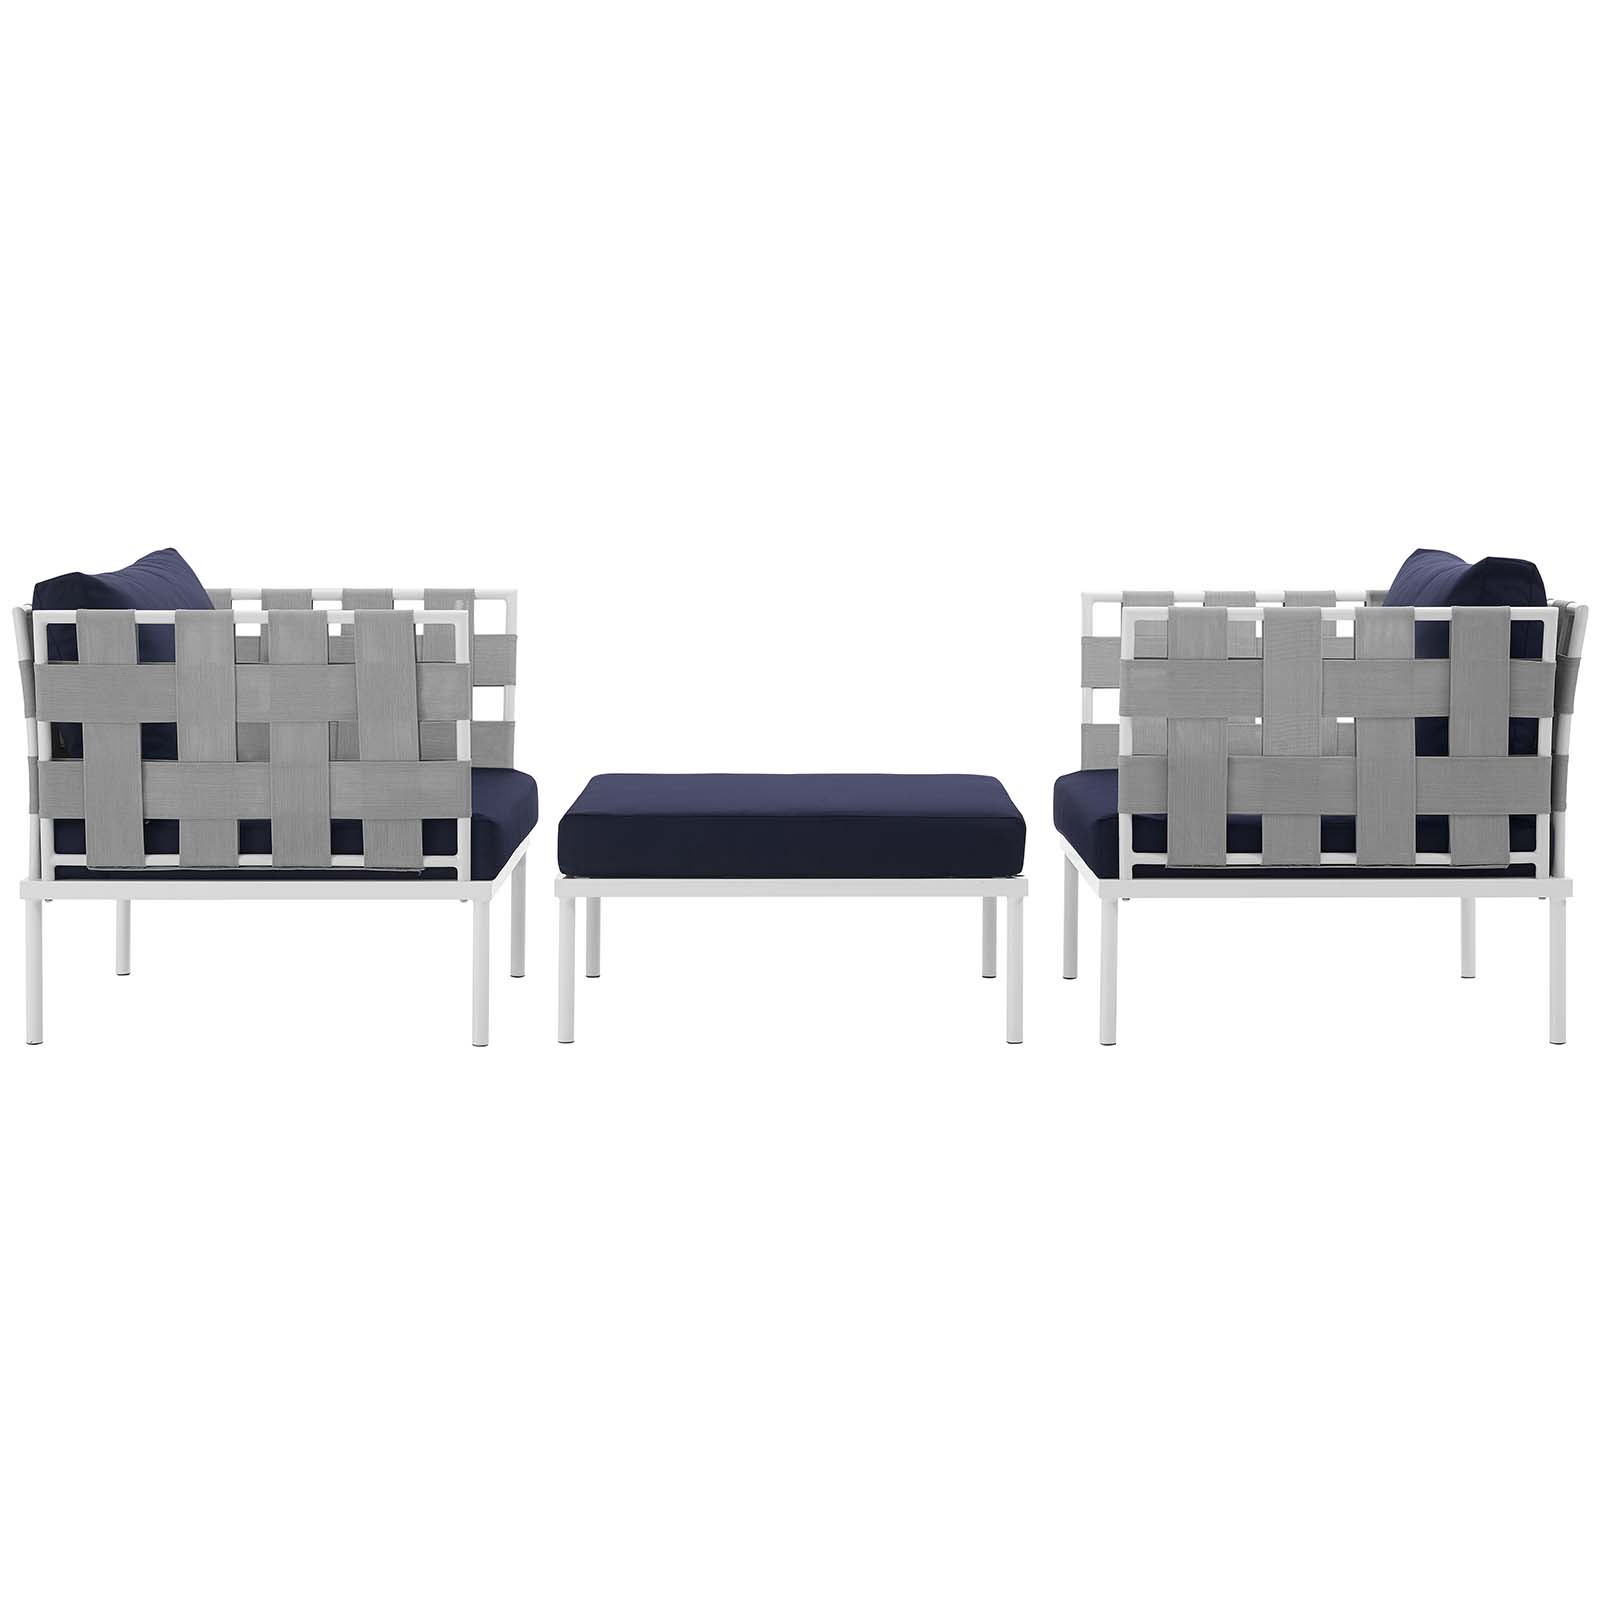 Modway Harmony 3 Piece Outdoor Patio Aluminum Sectional Sofa Set in White Navy - image 3 of 6